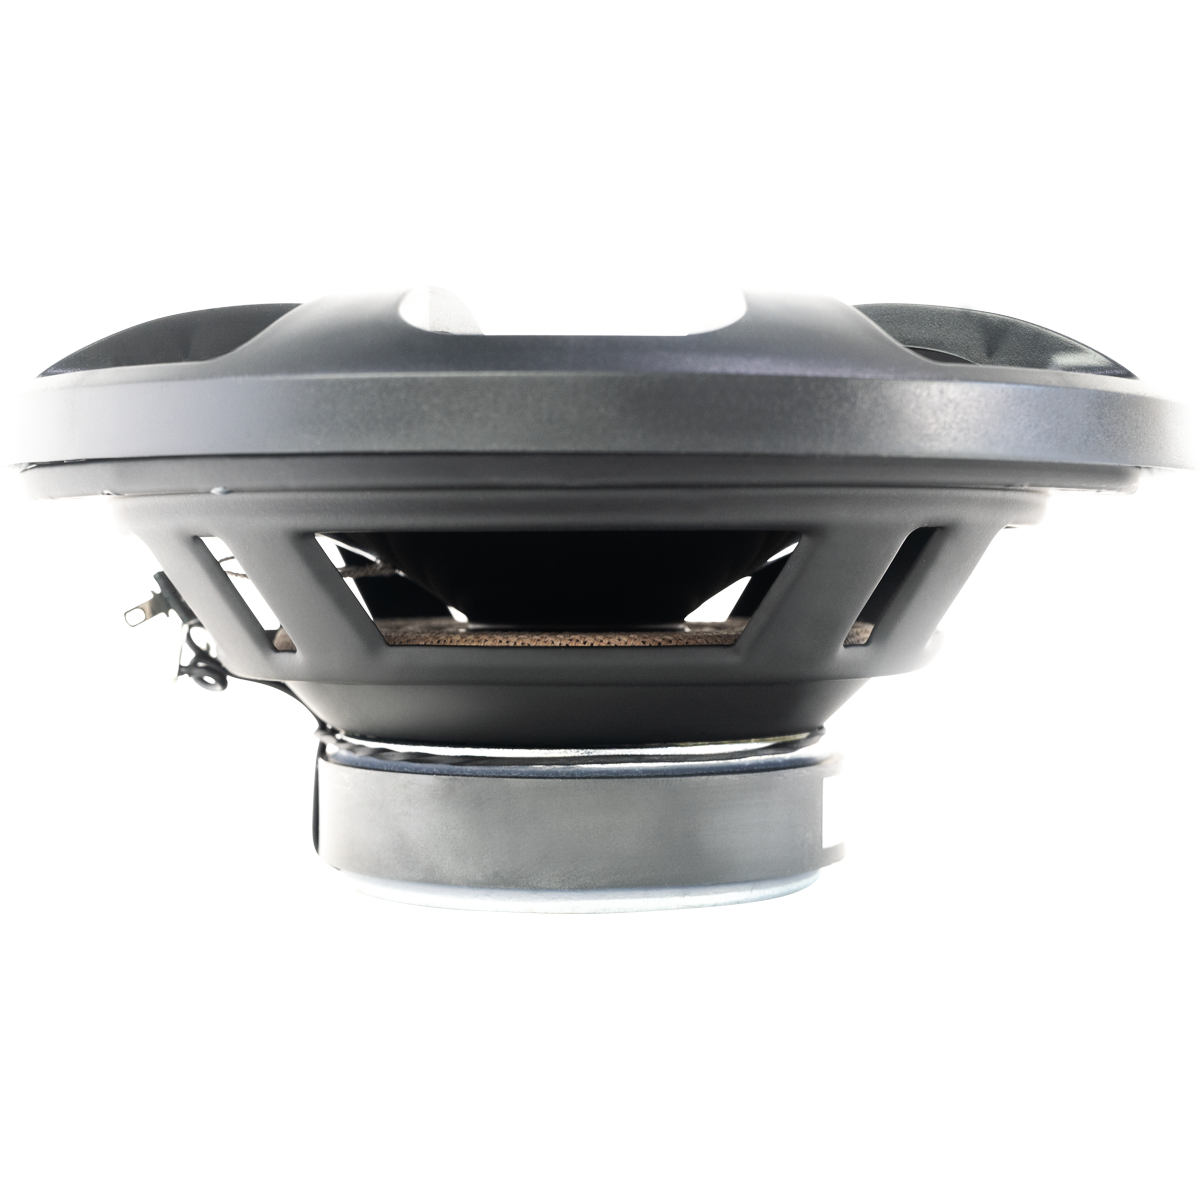 Single Stinger Audio 6.5" 50 Watt (RMS) Coaxial Car Speaker (wearing a grill) facing upwards on a white background